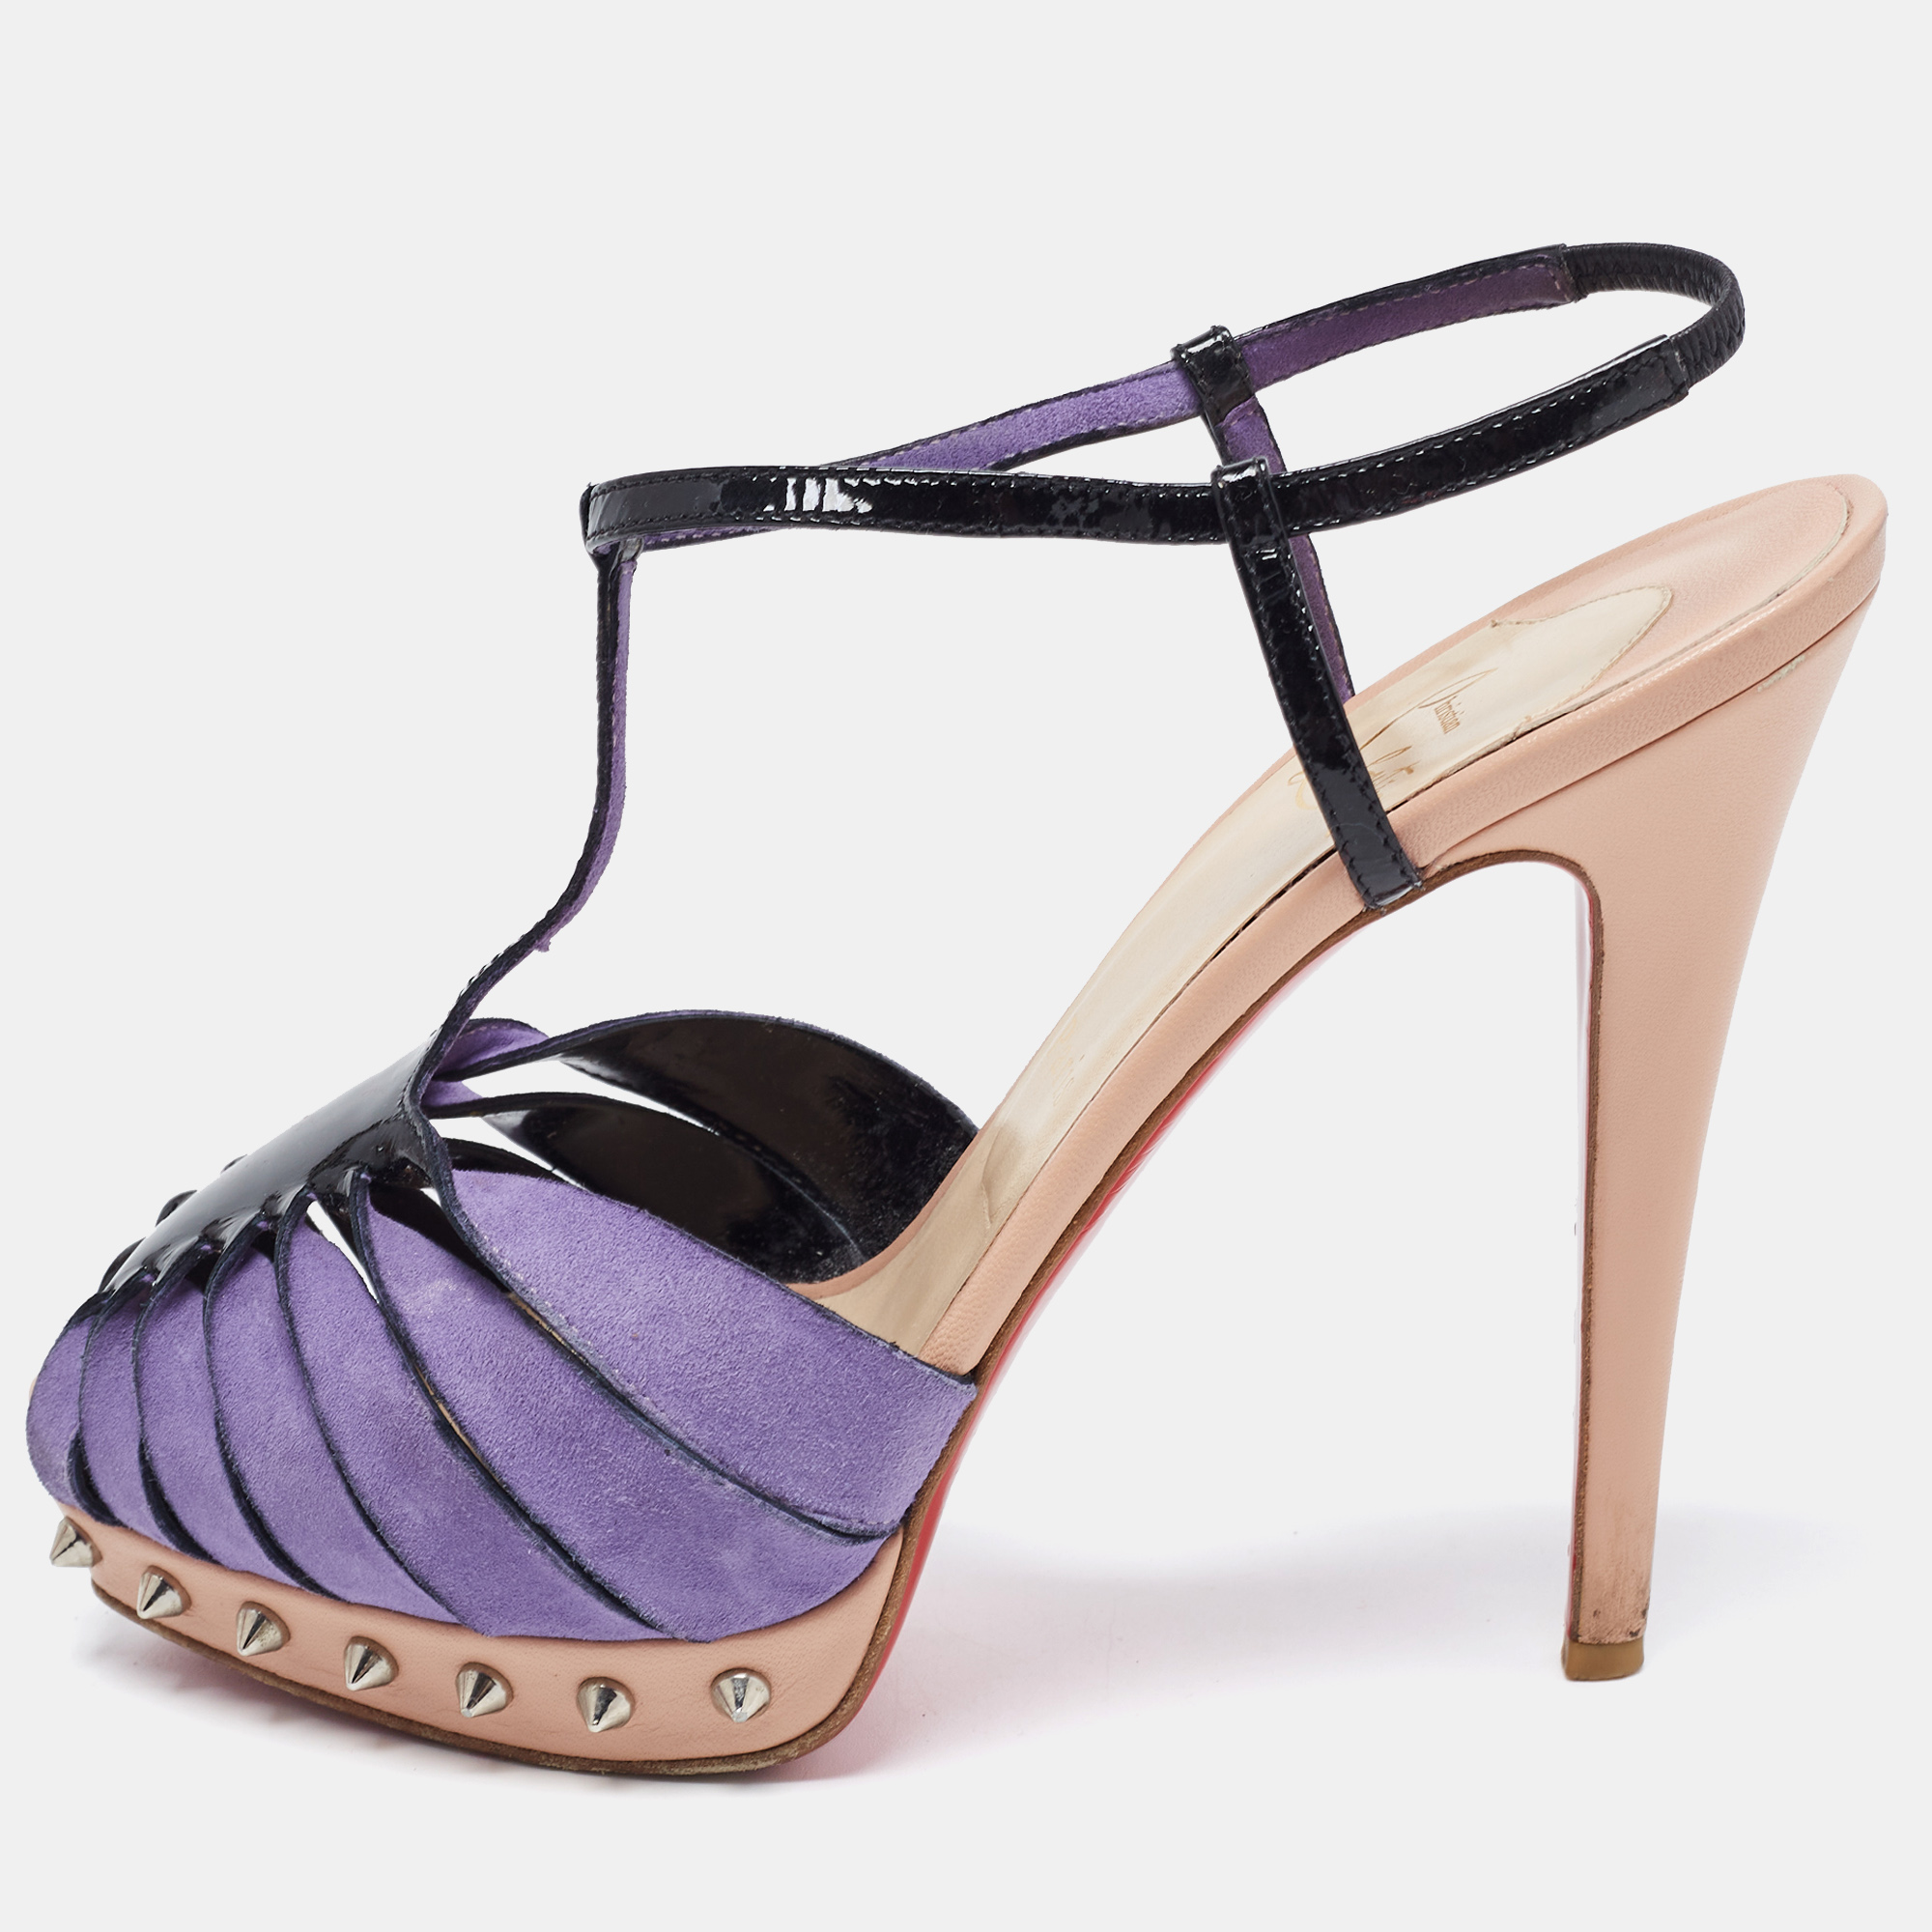 Pre-owned Christian Louboutin Purple/black Suede And Patent Leather Zigounette Spiked Slingback Sandals Size 38.5